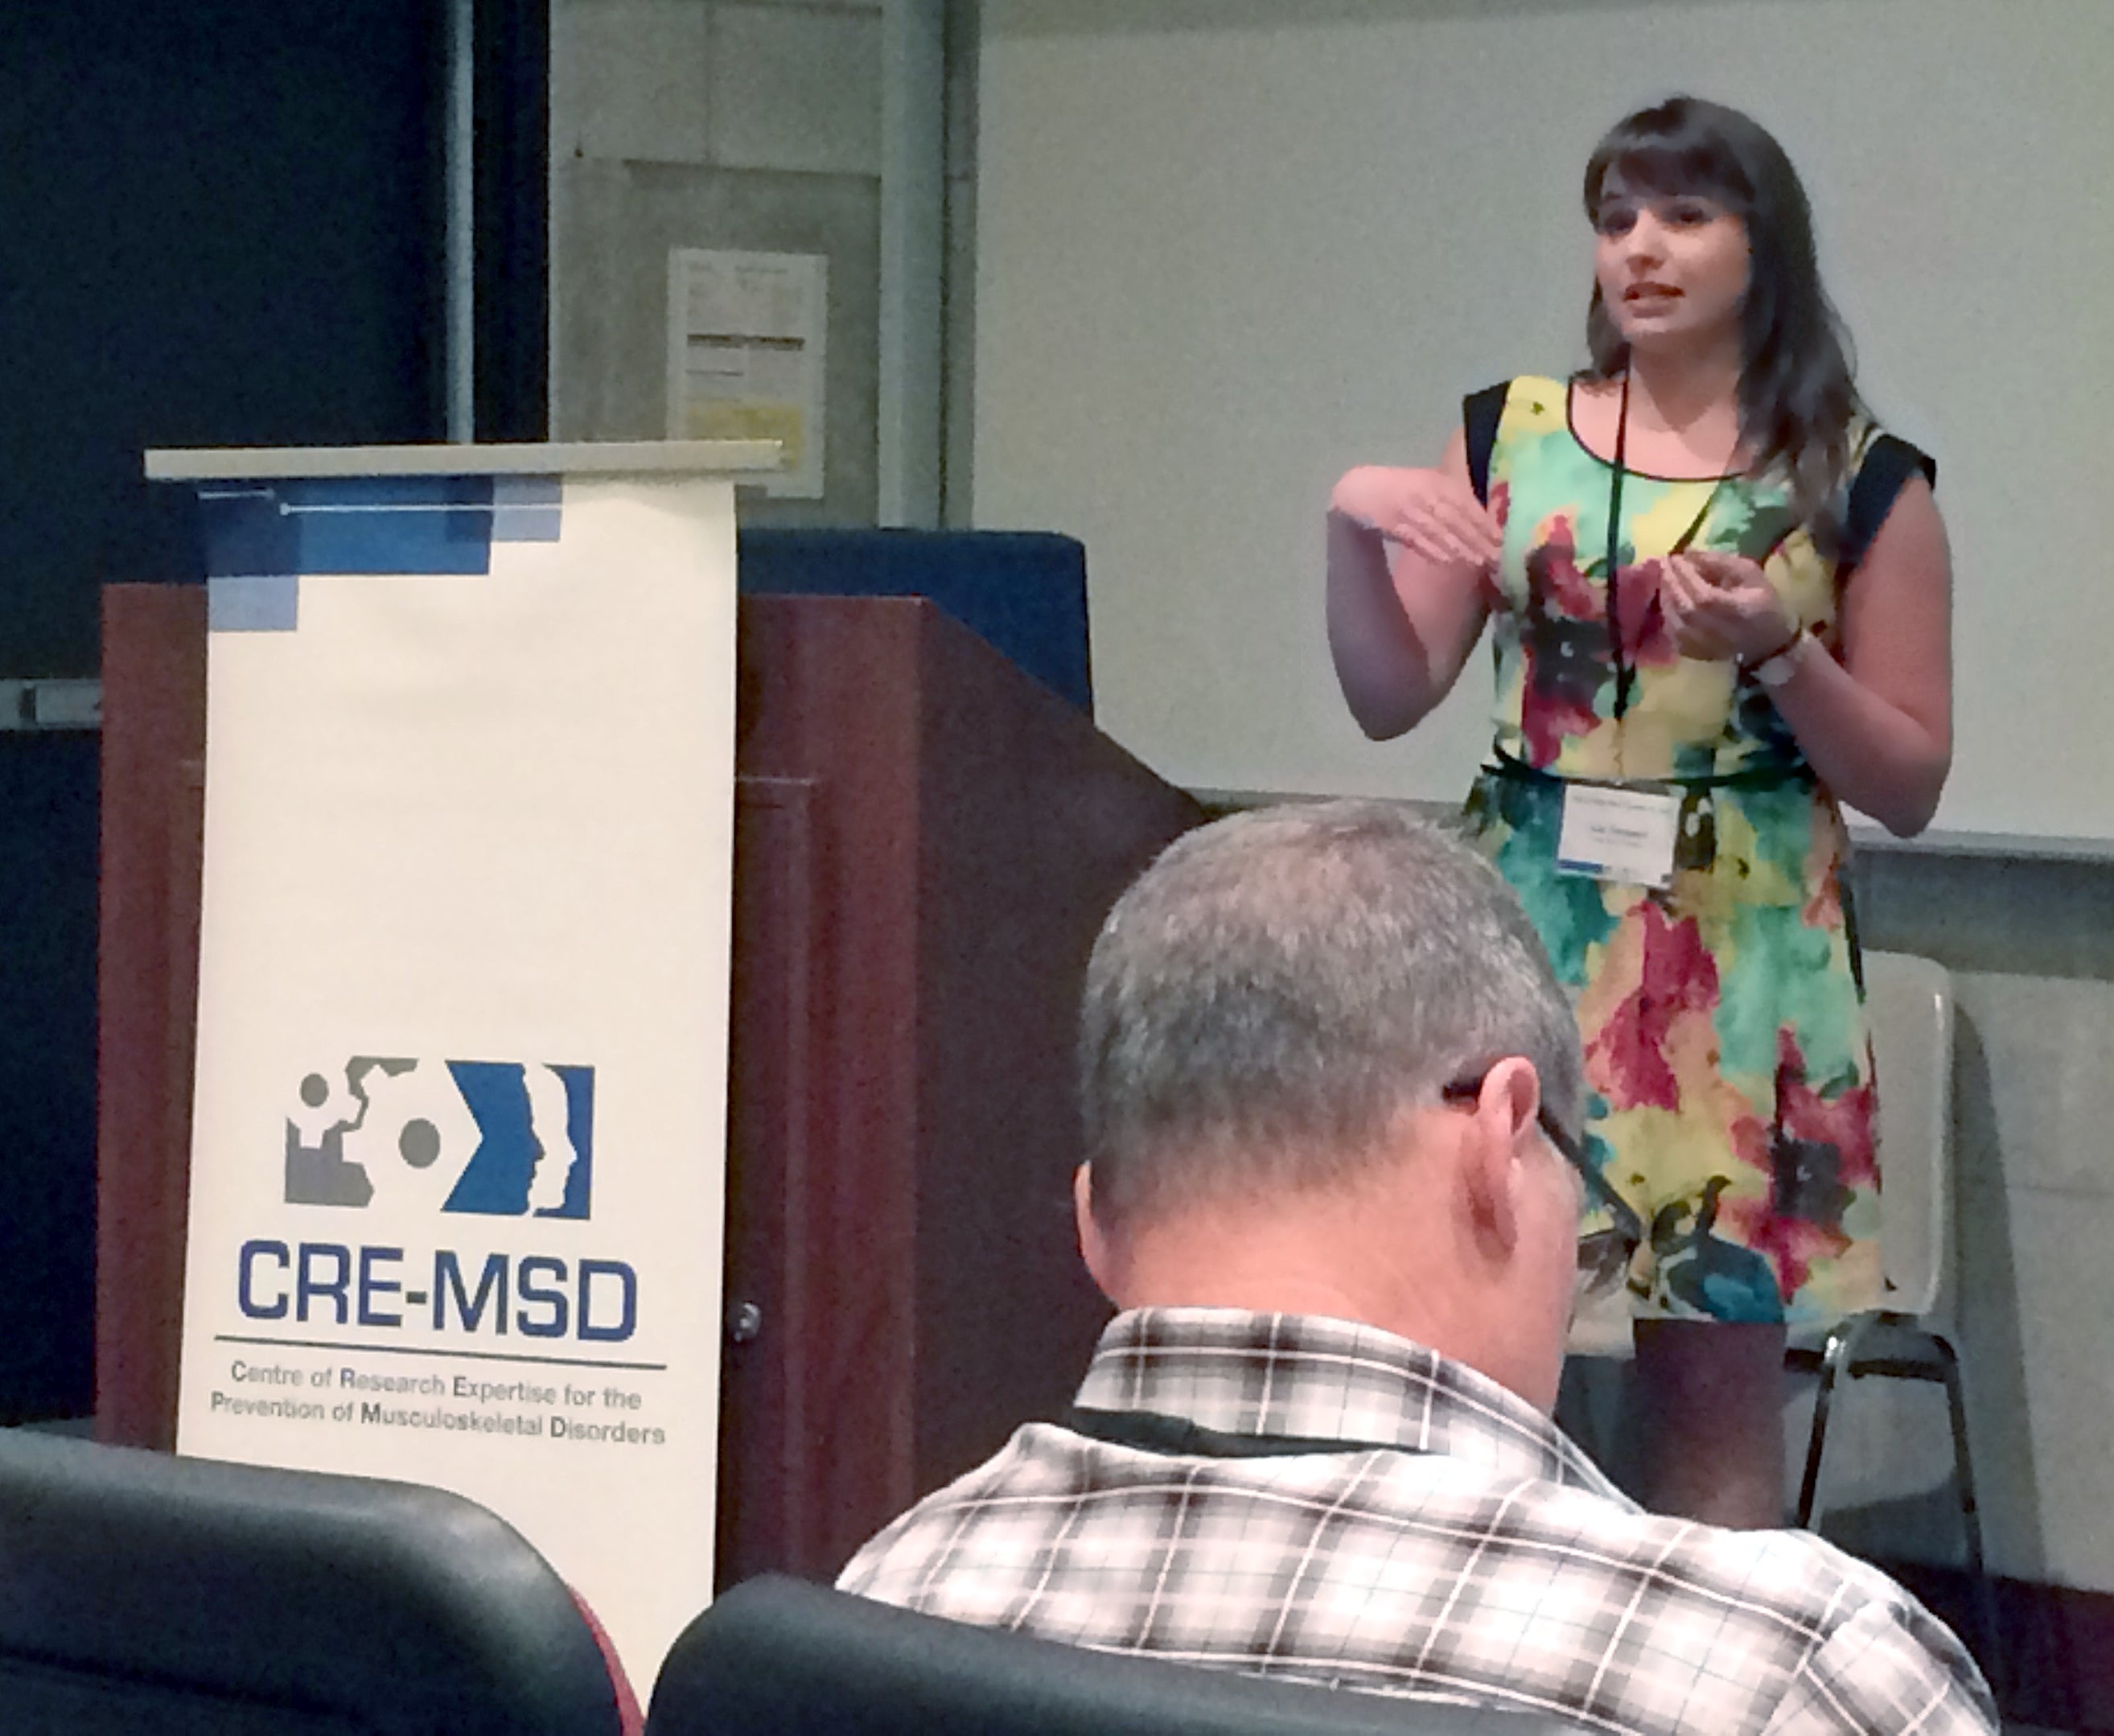 Liana Tennant presenting at the CRE-MSD conference